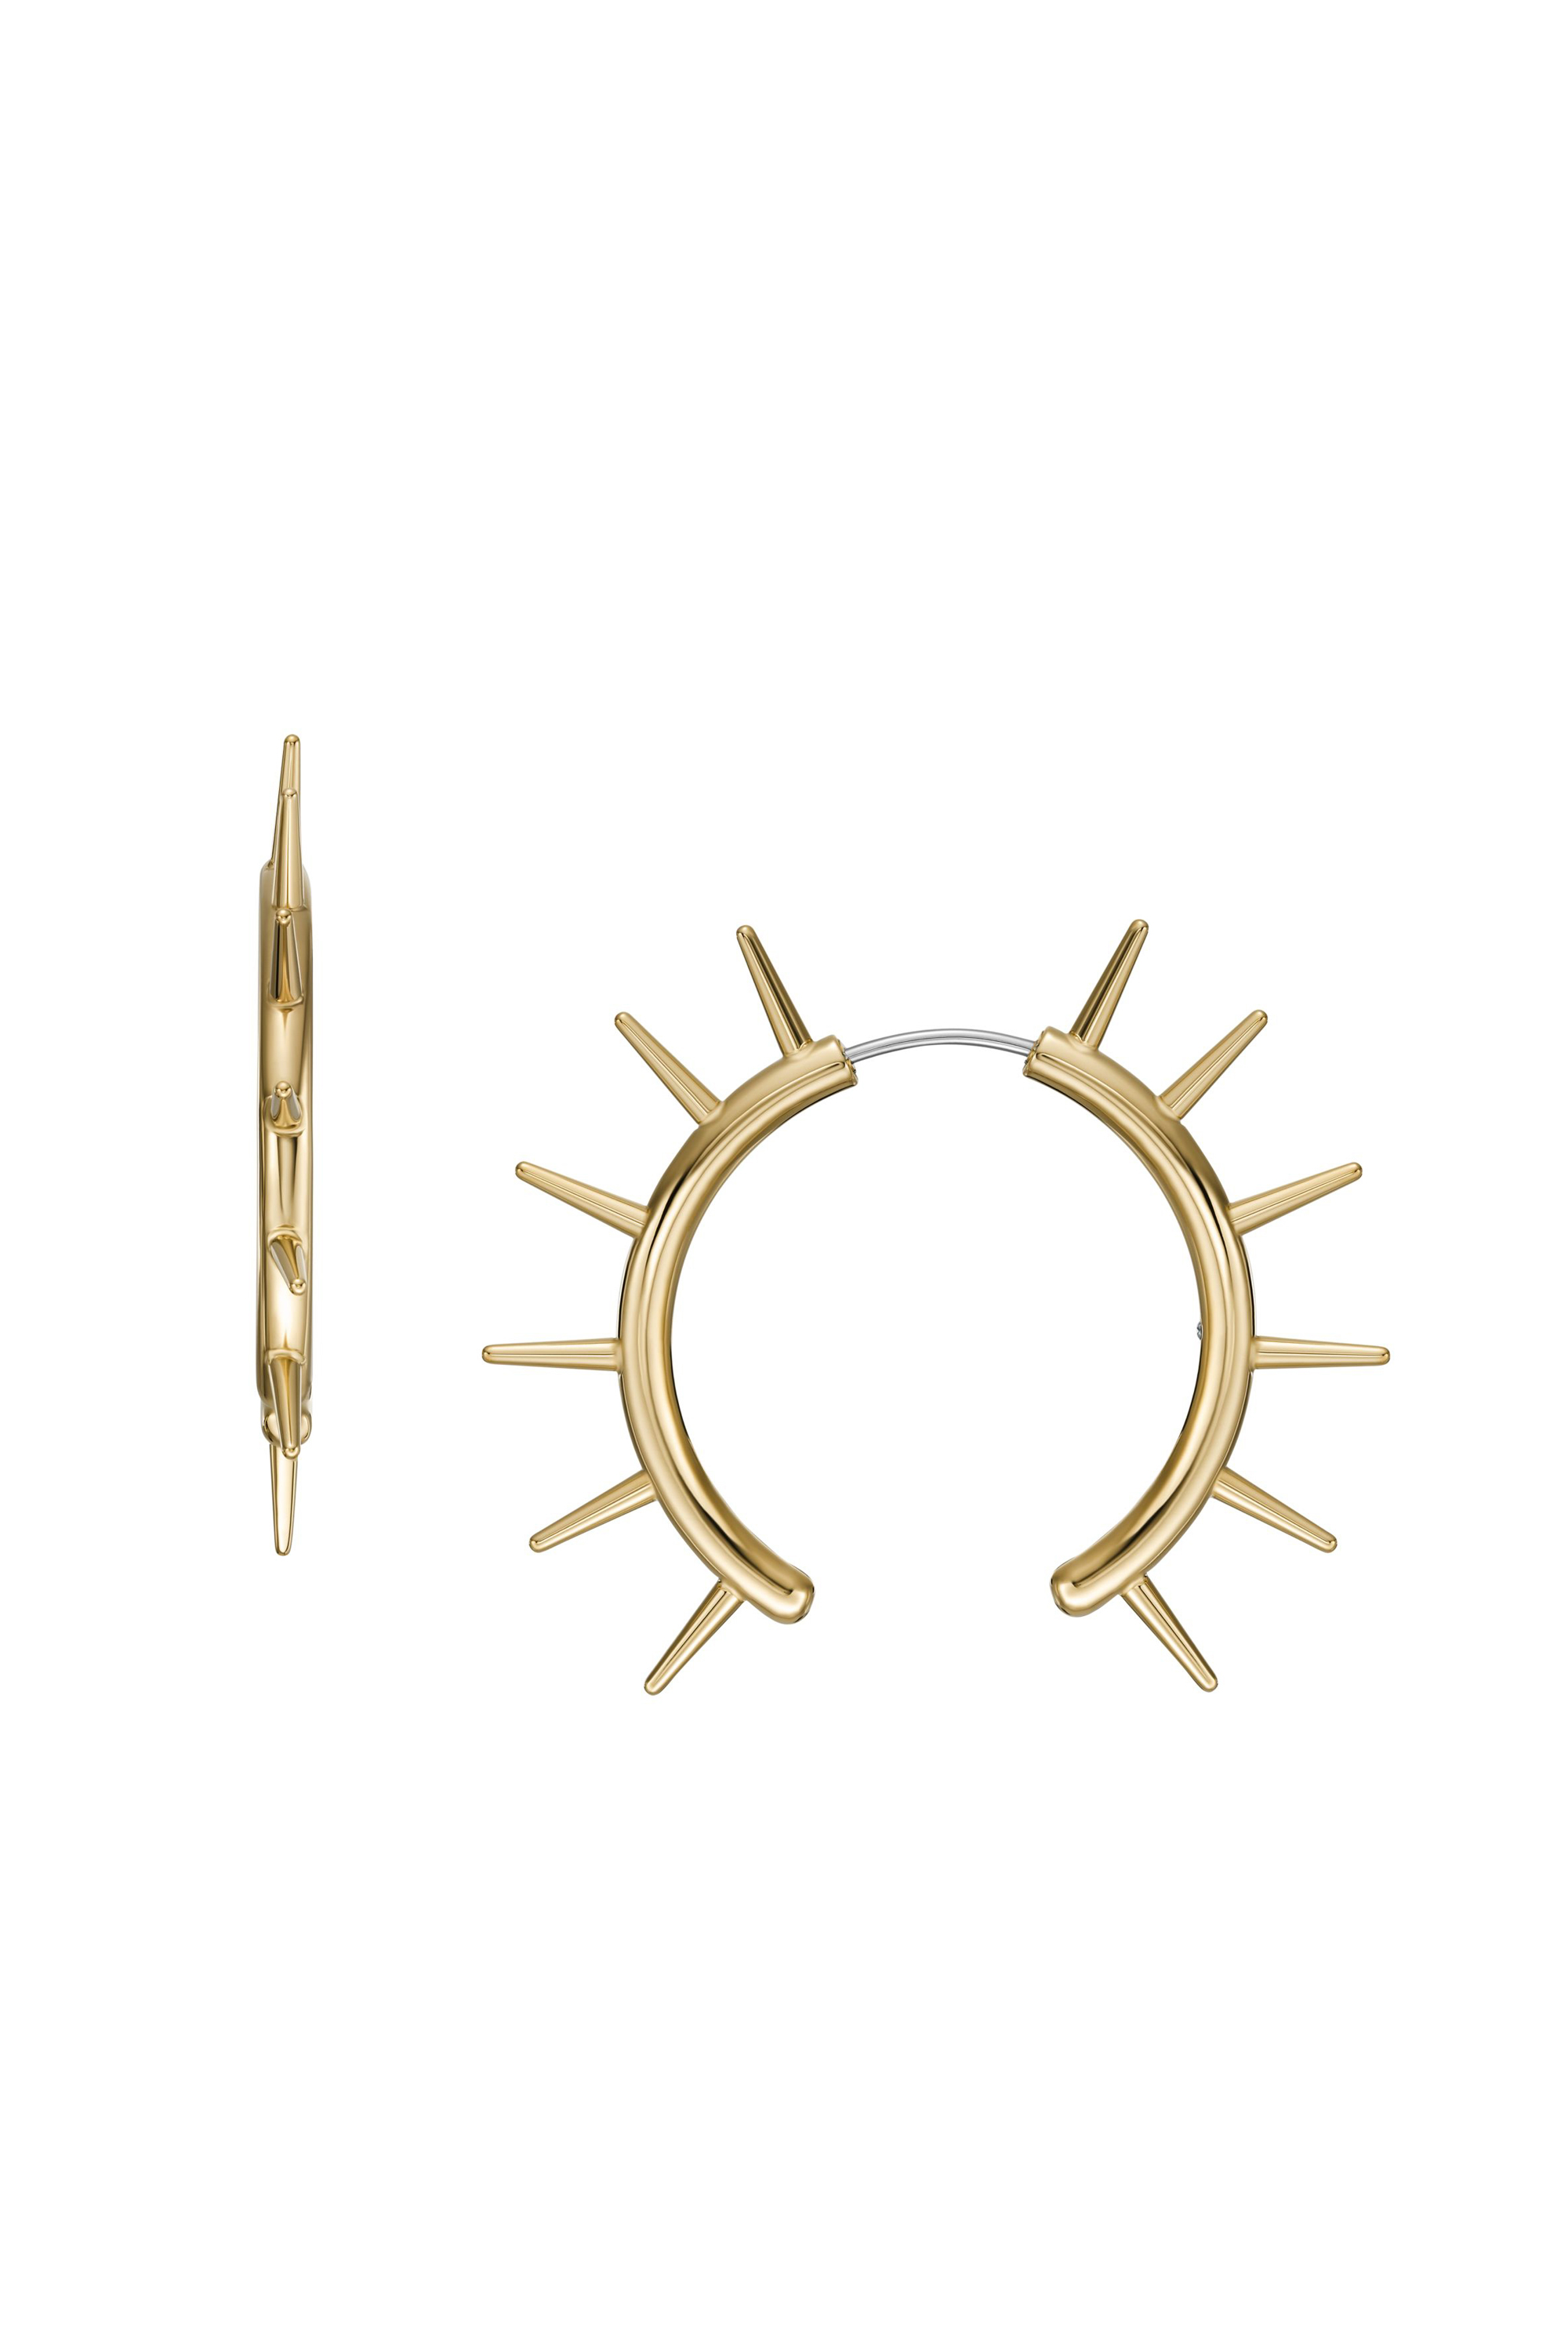 Diesel - DX1452710, Unisex Gold-Tone Stainless Steel Front to Back Earrings in Oro - Image 2